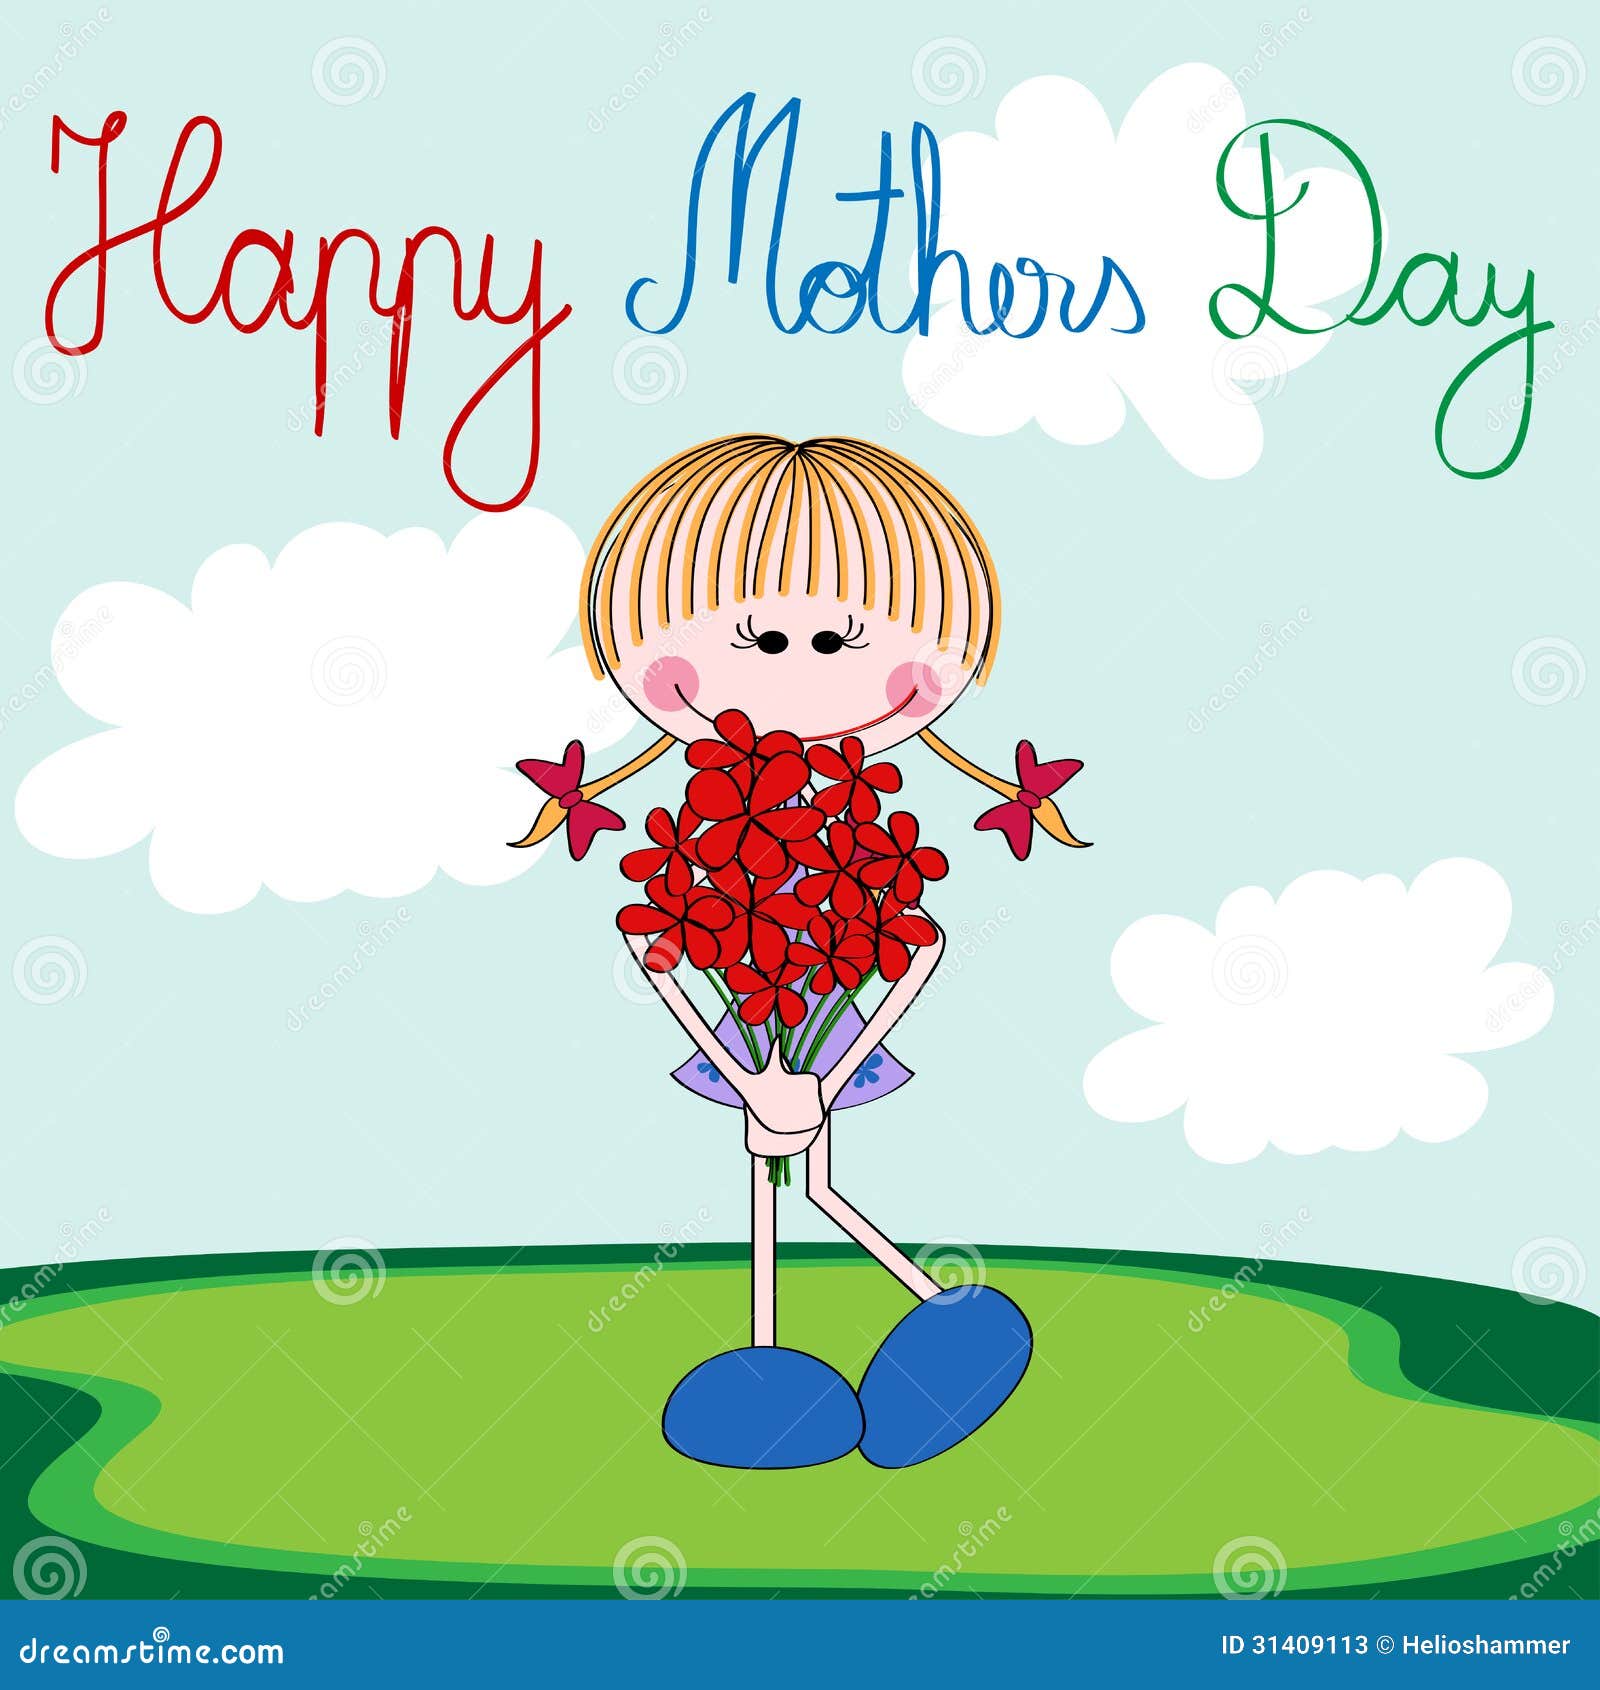 Happy Mothers Day Card With Cartoon Girl Stock Vector - Illustration